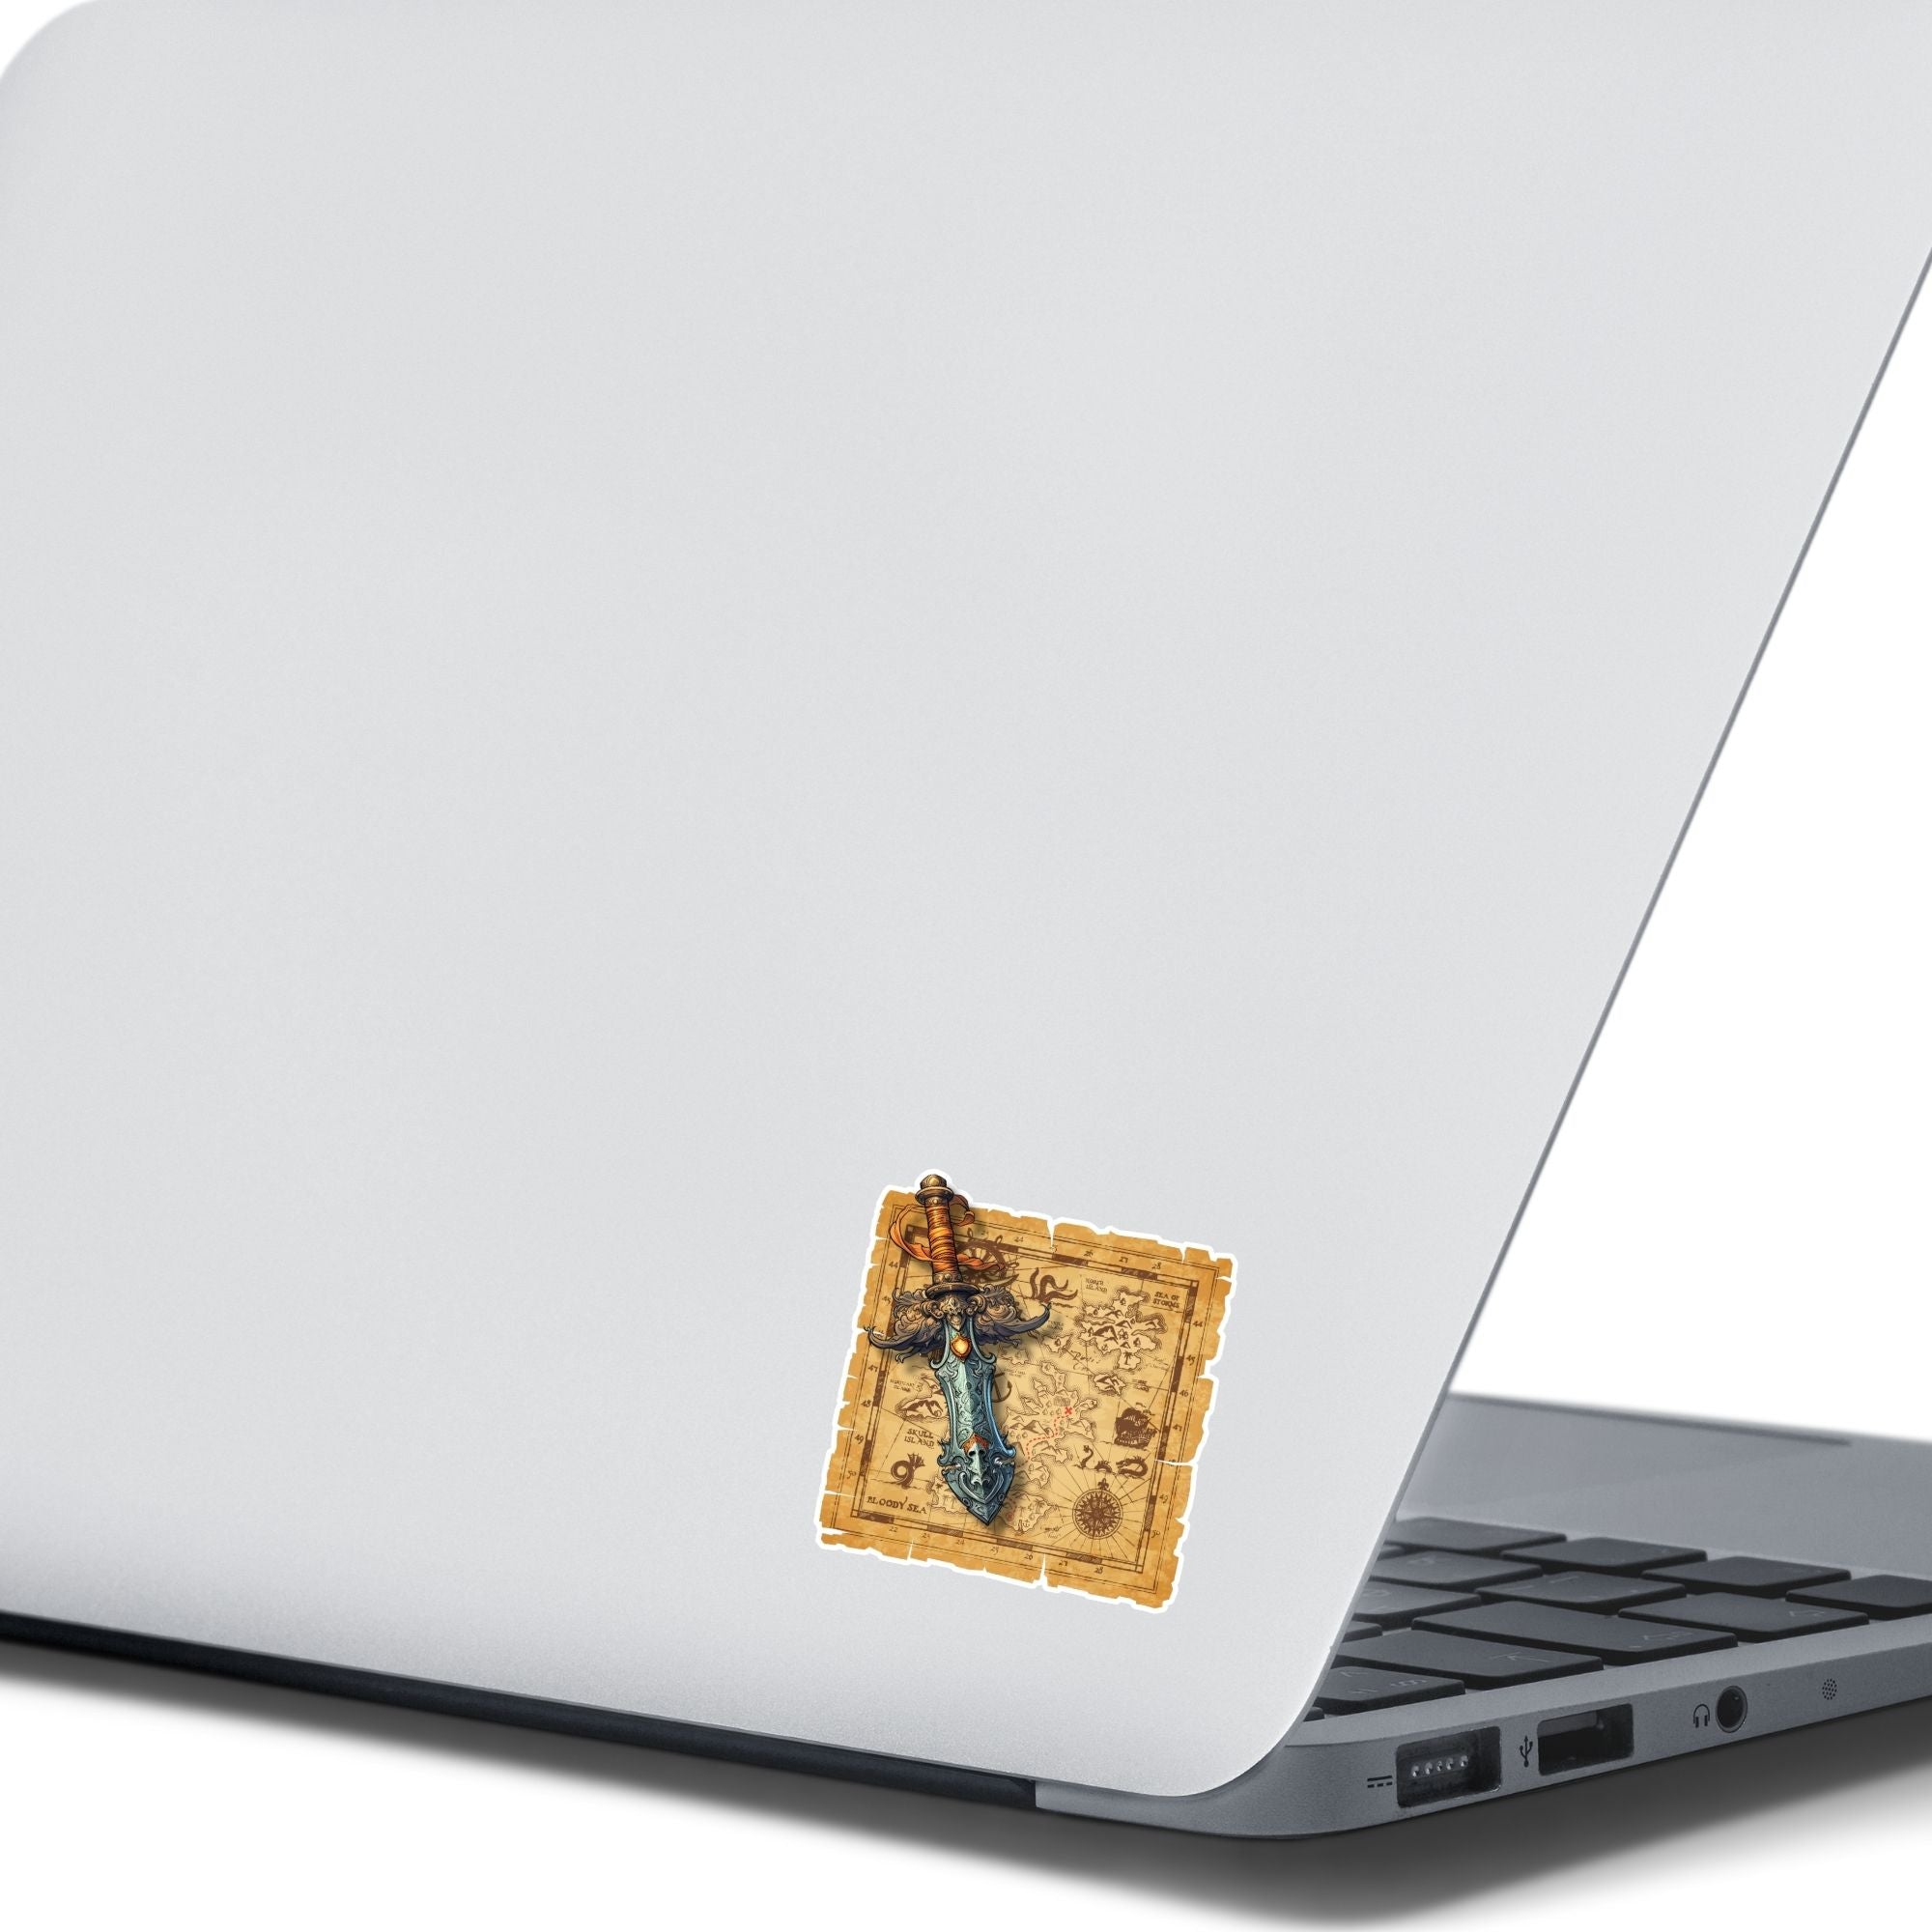 This image shows the Pirate Dagger on a Map Die-Cut Sticker on the back of an open laptop.